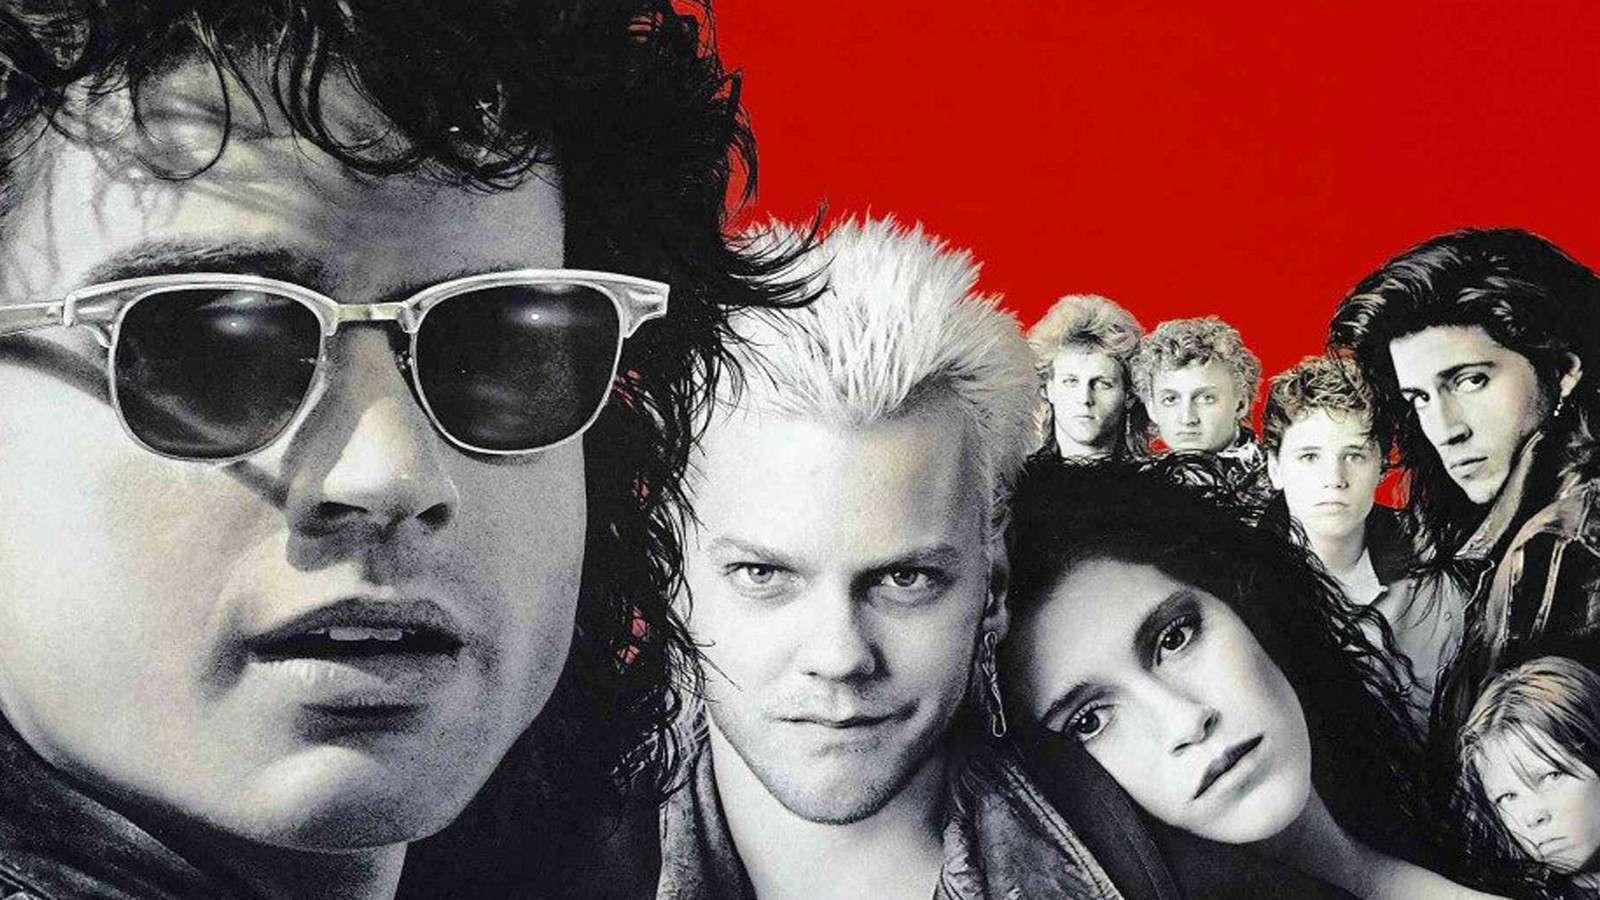 The vampires in The Lost Boys.